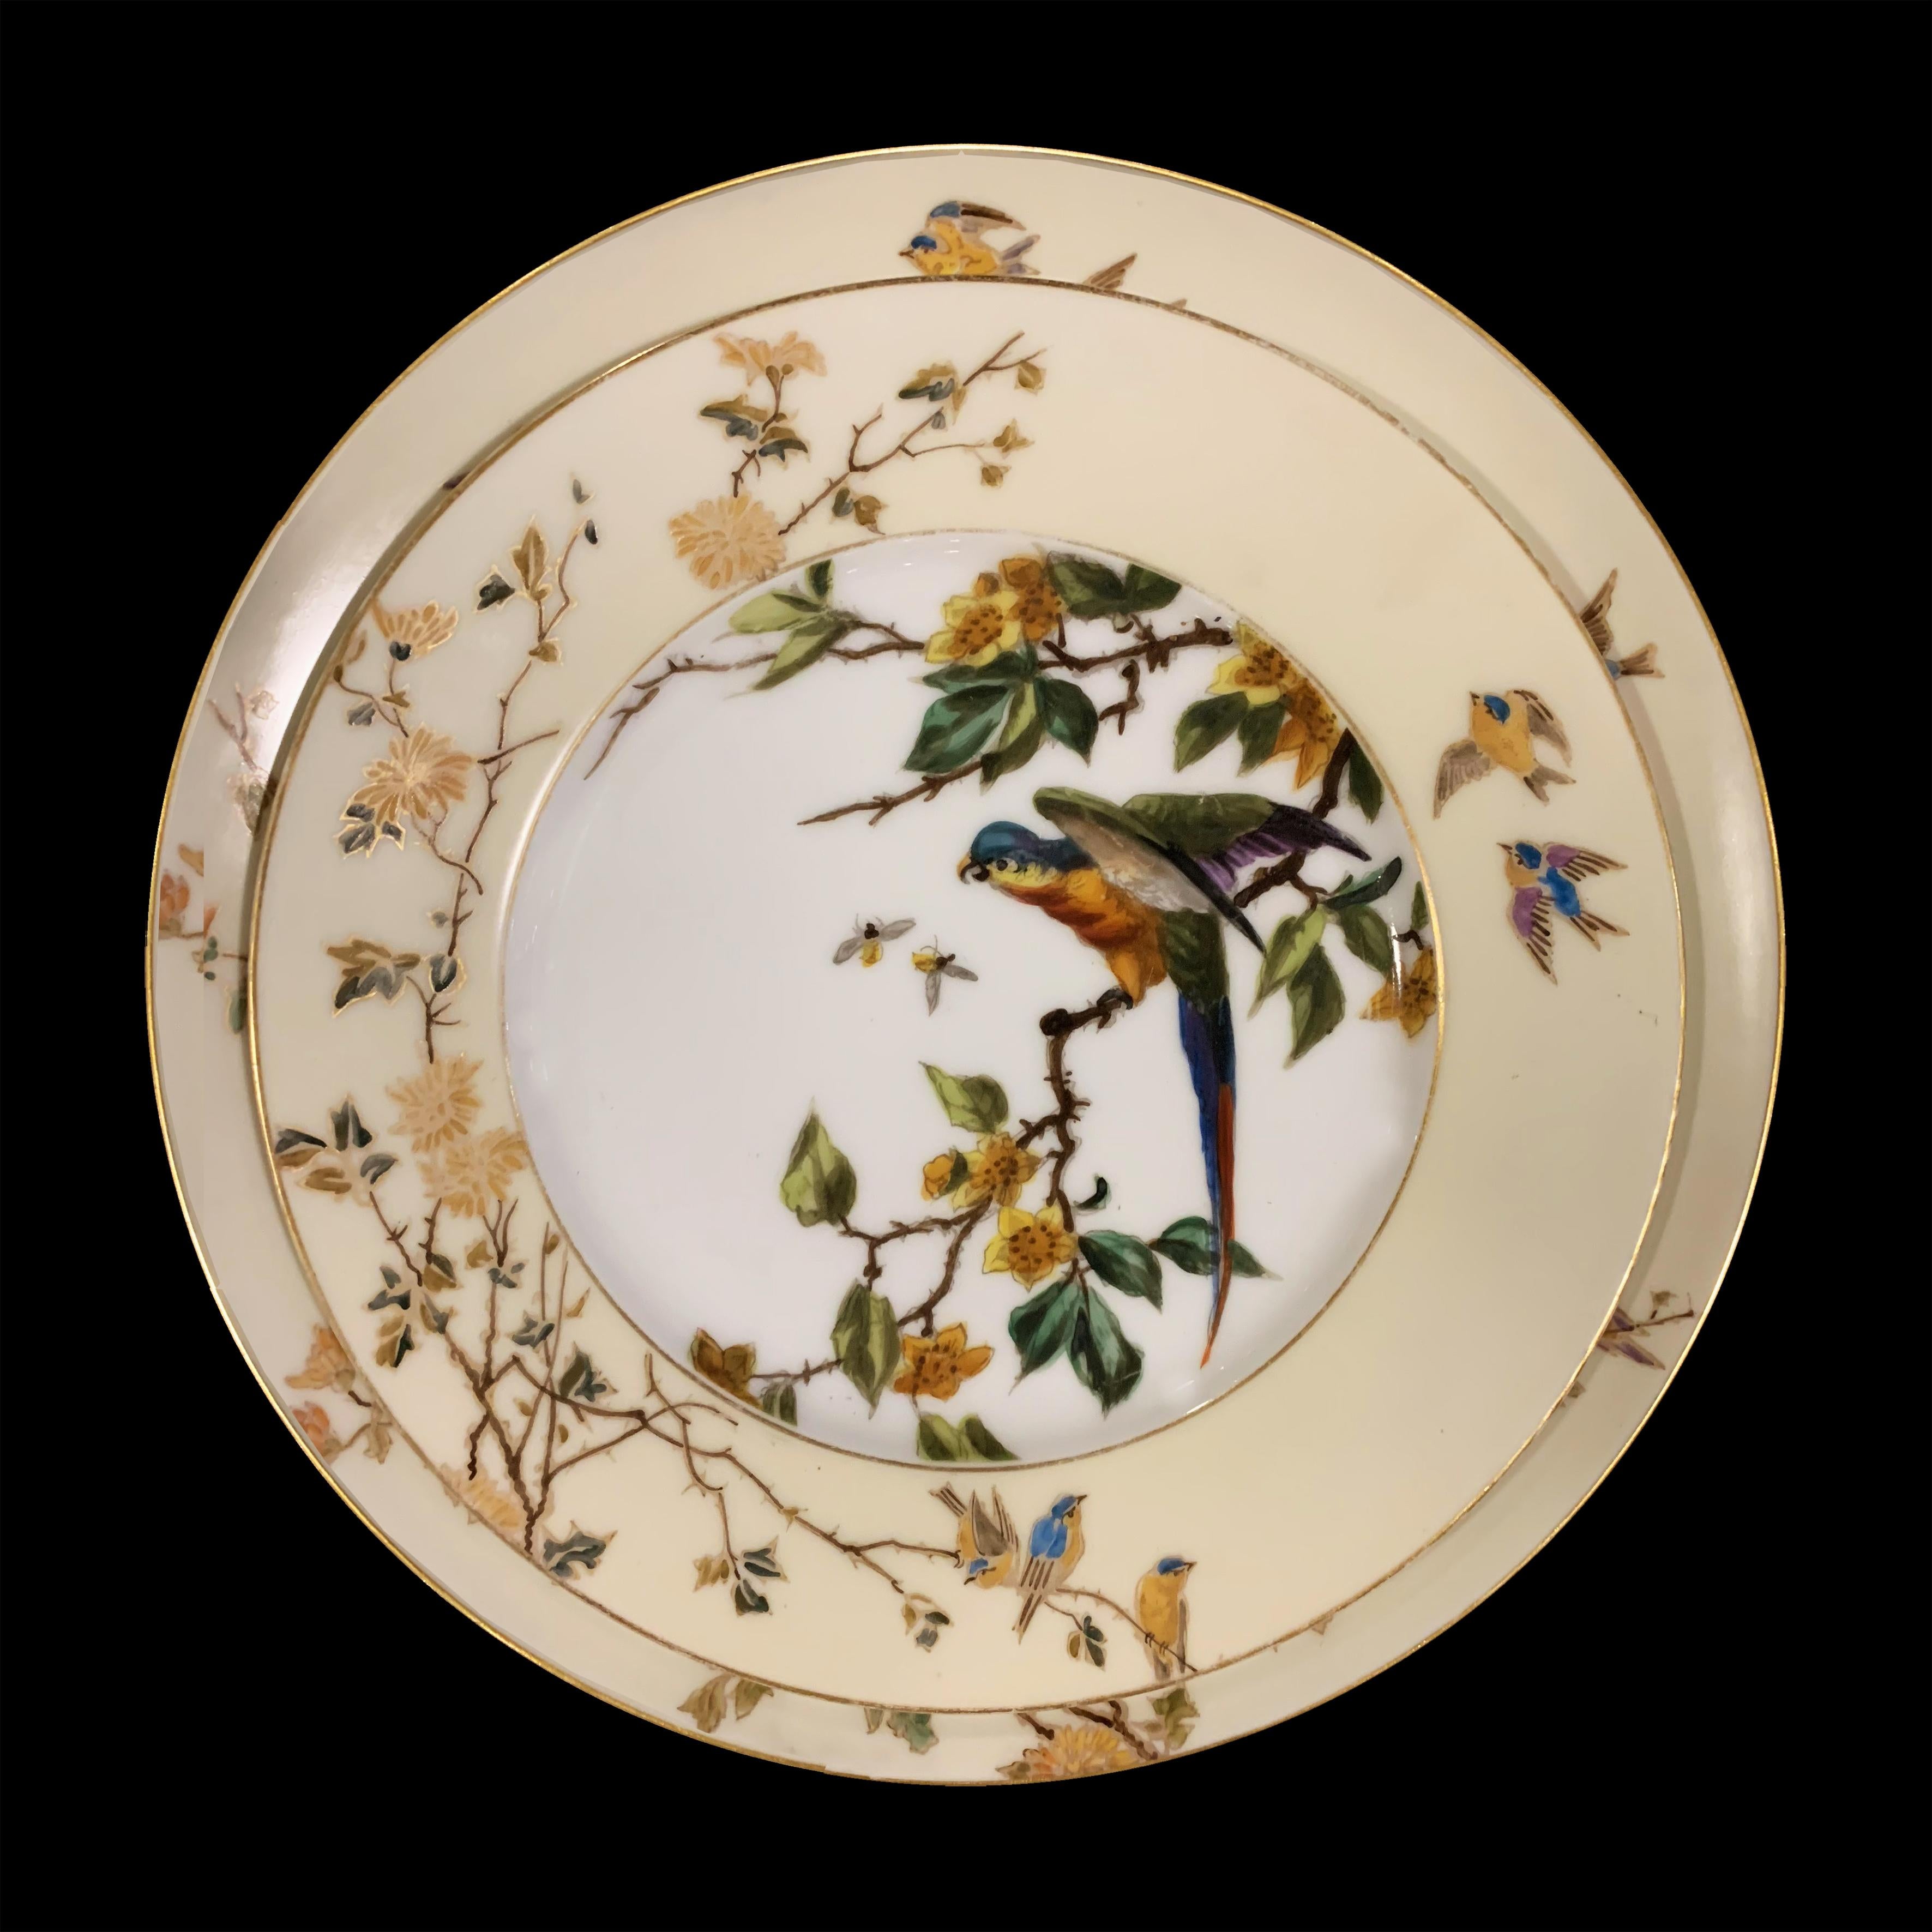 Dinner set in world-famous Limoges porcelain with hand-painted polychrome decoration and gold 